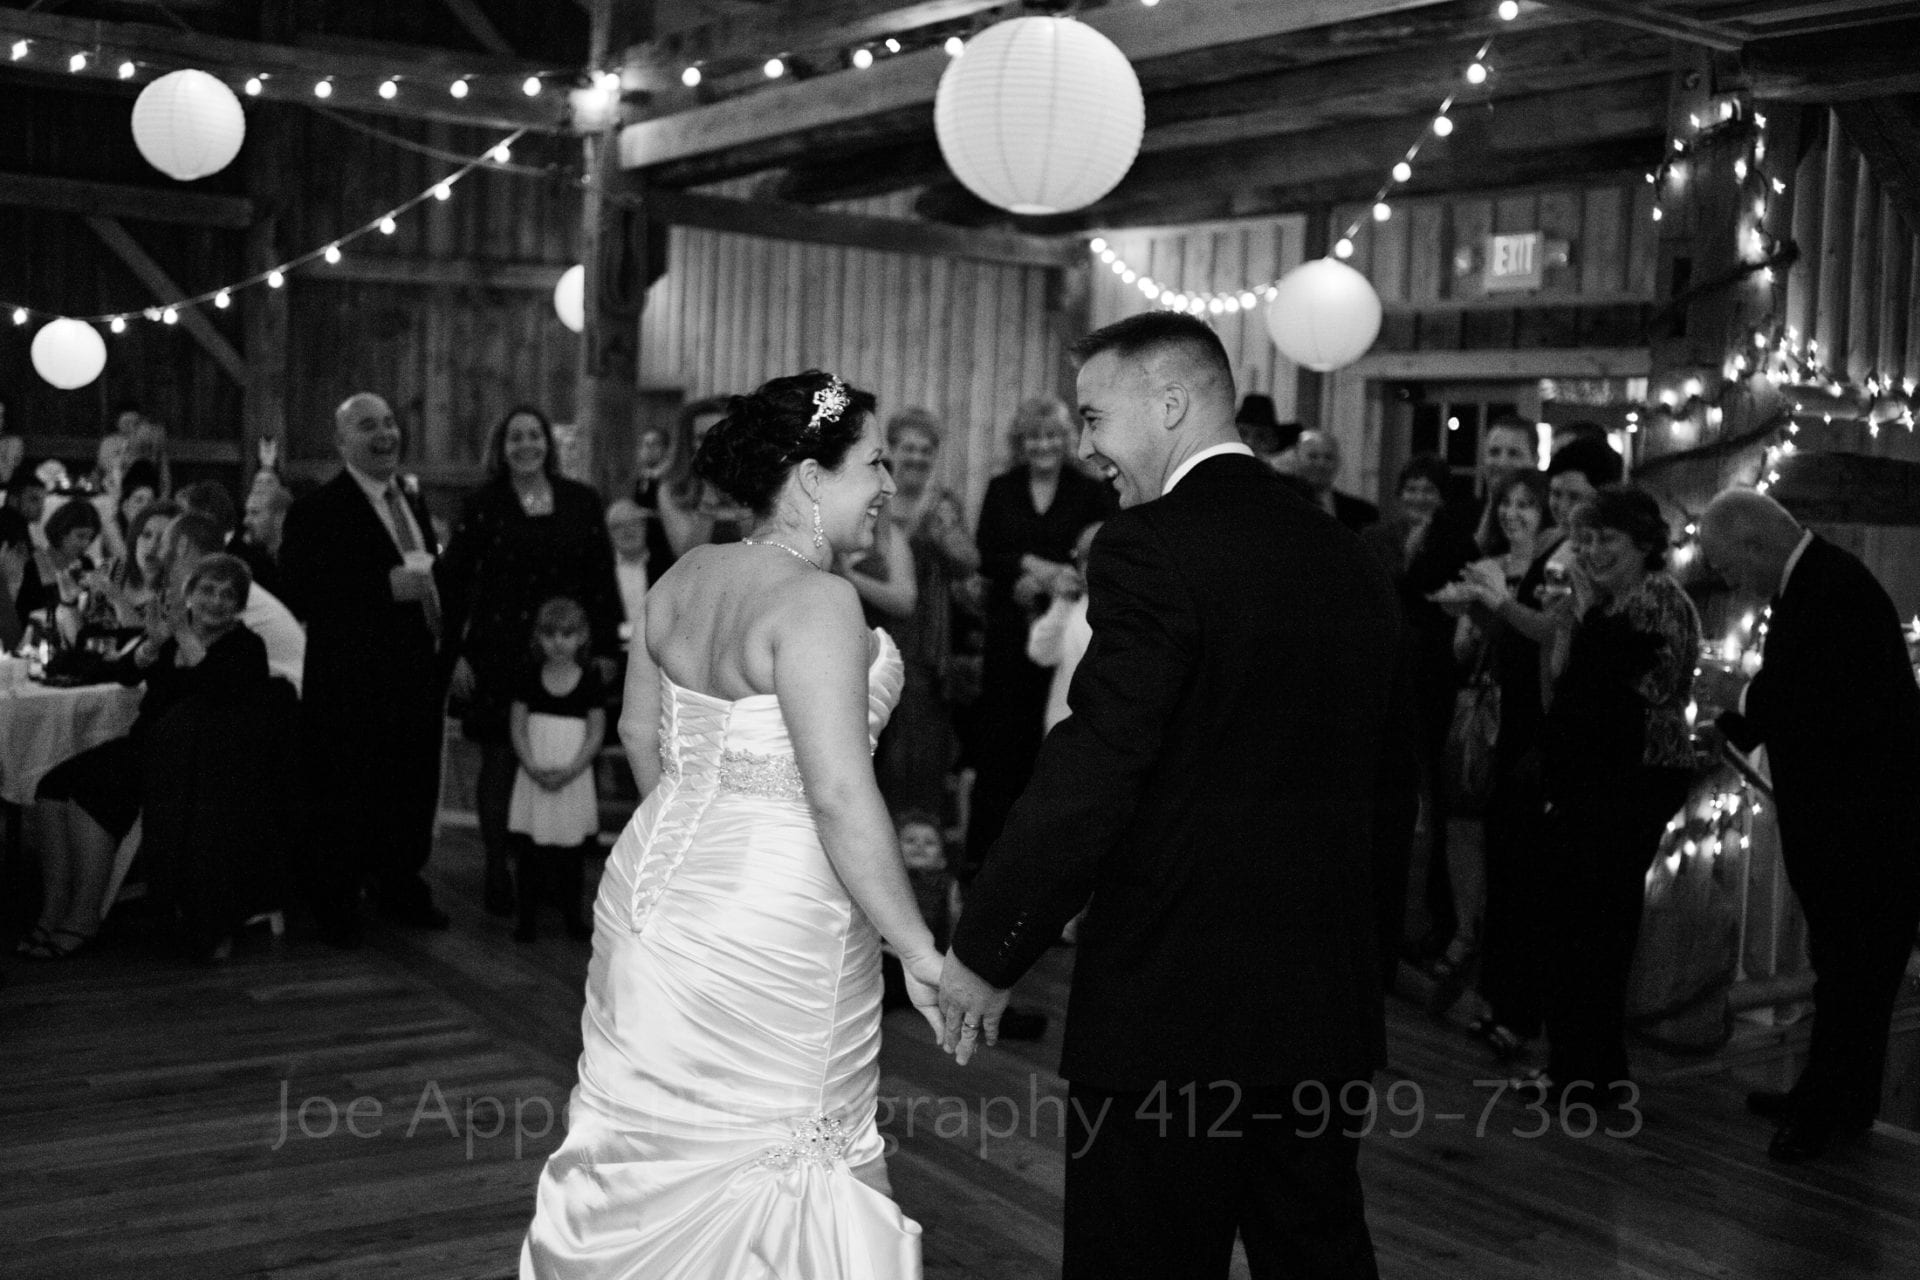 A bride and groom hold hands as they walk to the dance floor surrounded by applauding guests. Armstrong Farms Weddings